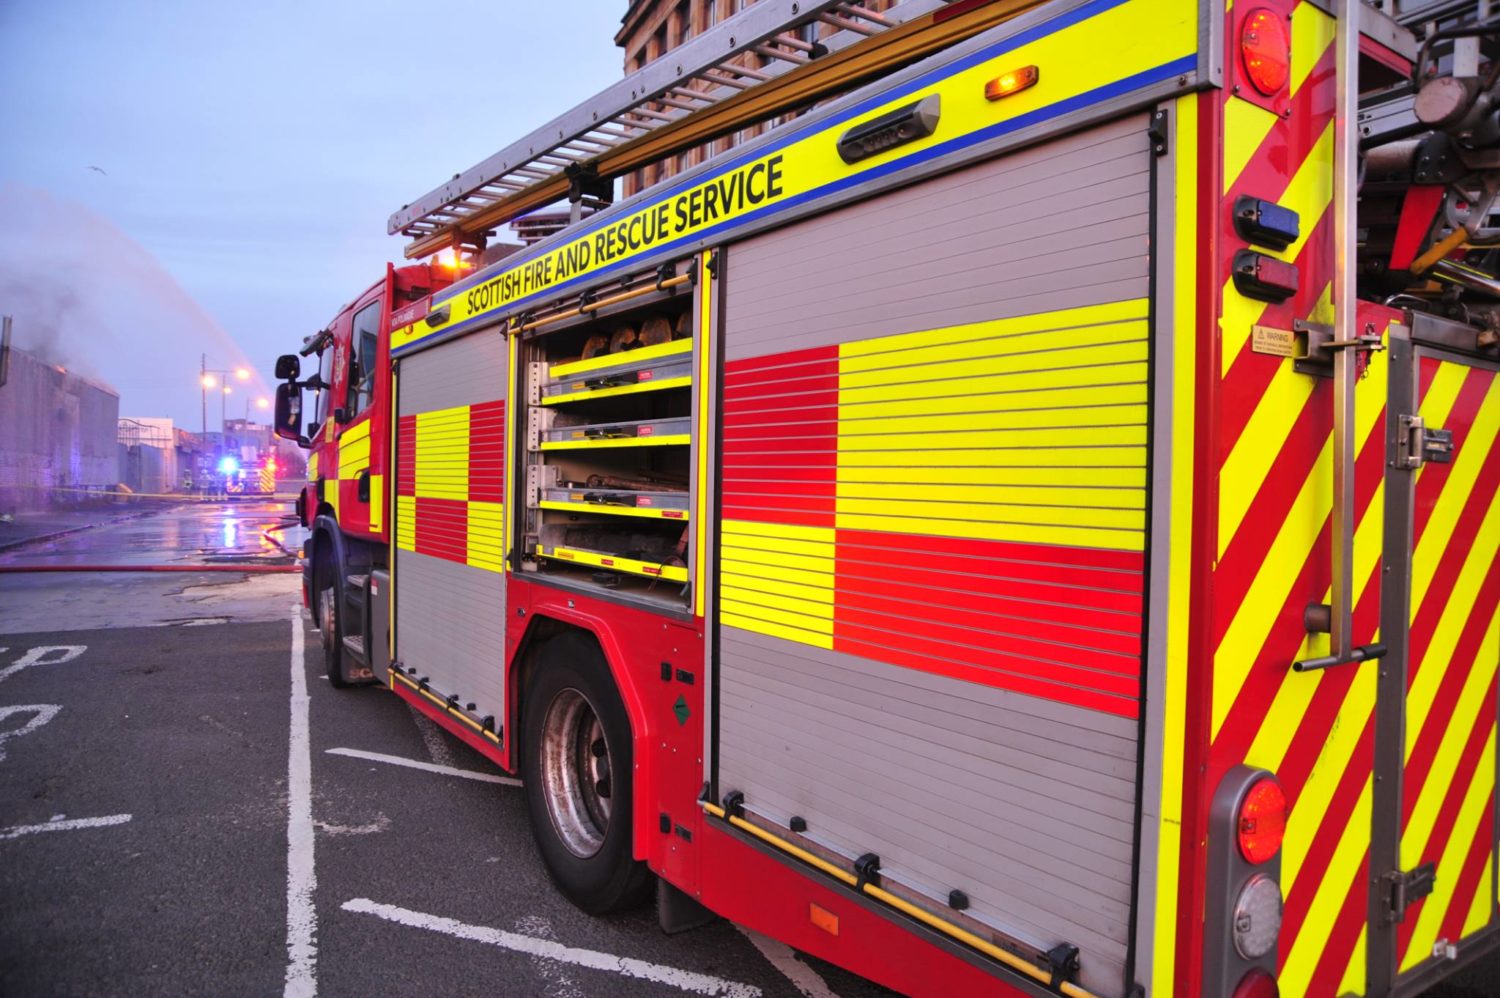 Firefighters tackle house blaze in town high street